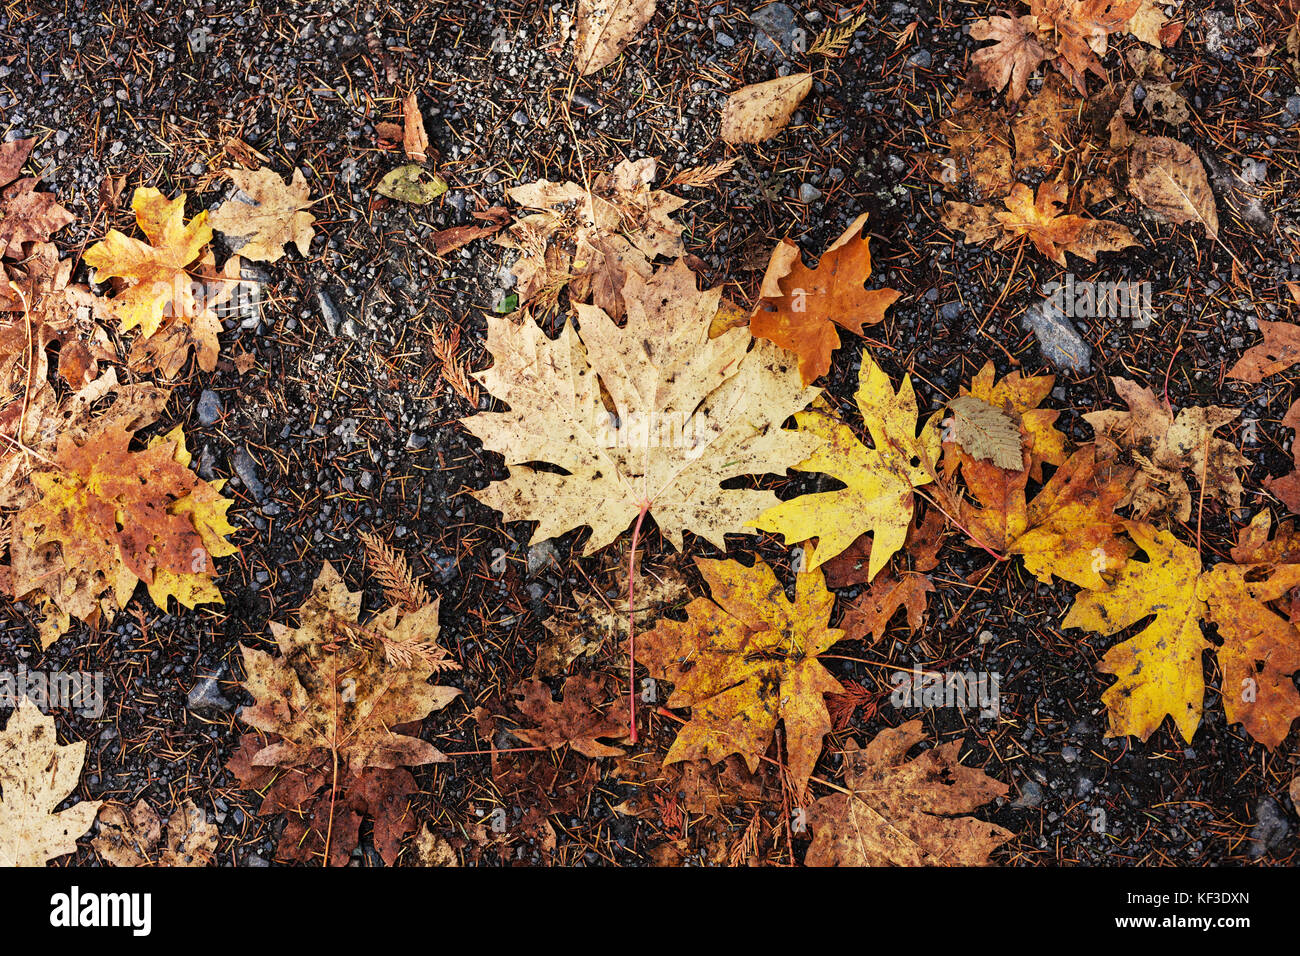 Fallen leaves from a Canadian maple tree.  Vancouver Island, BC Canada Stock Photo